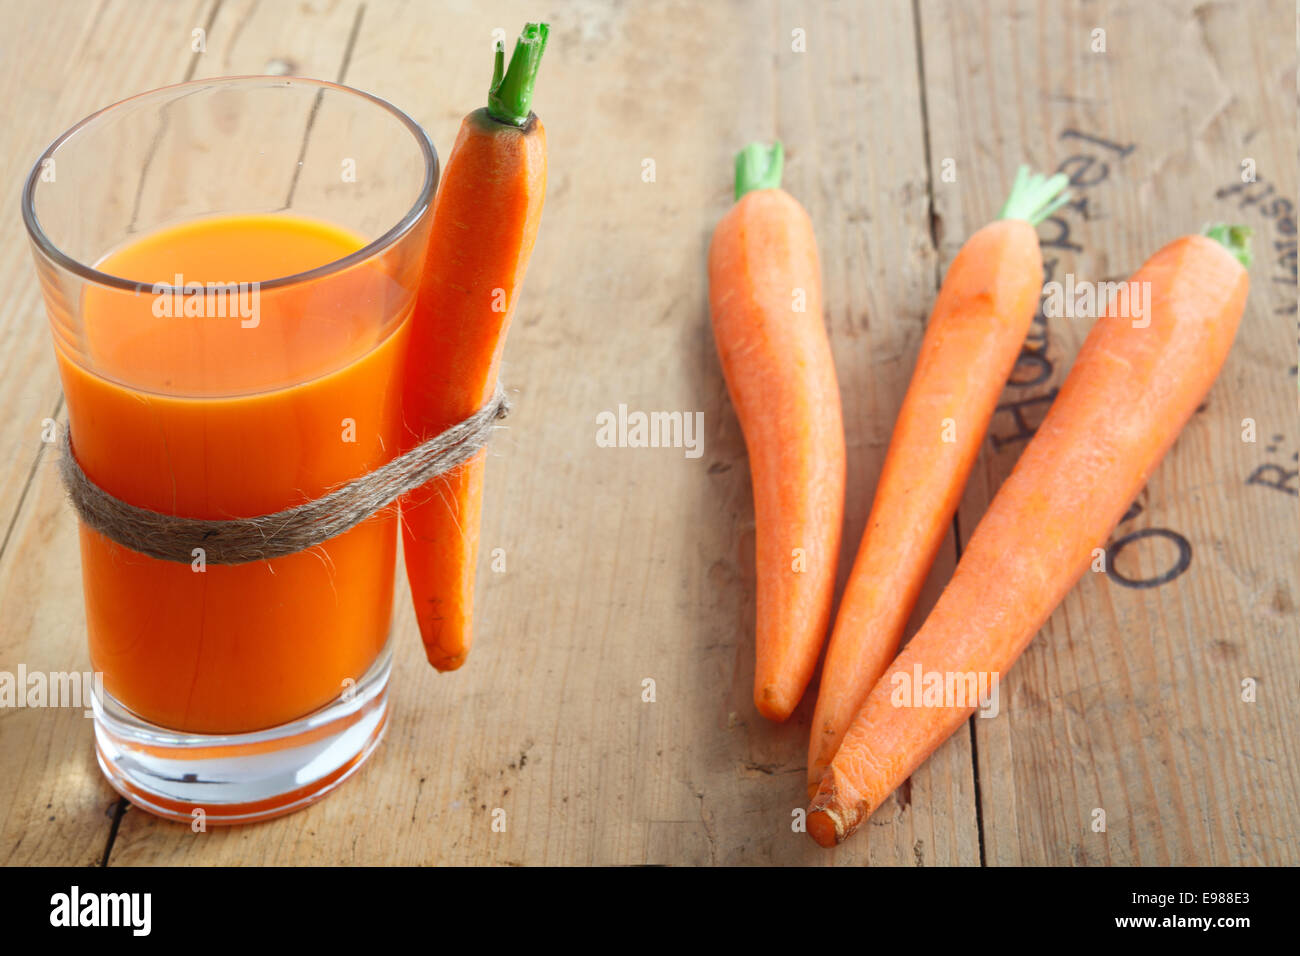 A tall glass of healthy freshly blended carrot juice on a wooden table with a whole carrot attached and a trio of raw carrots lying alongside Stock Photo